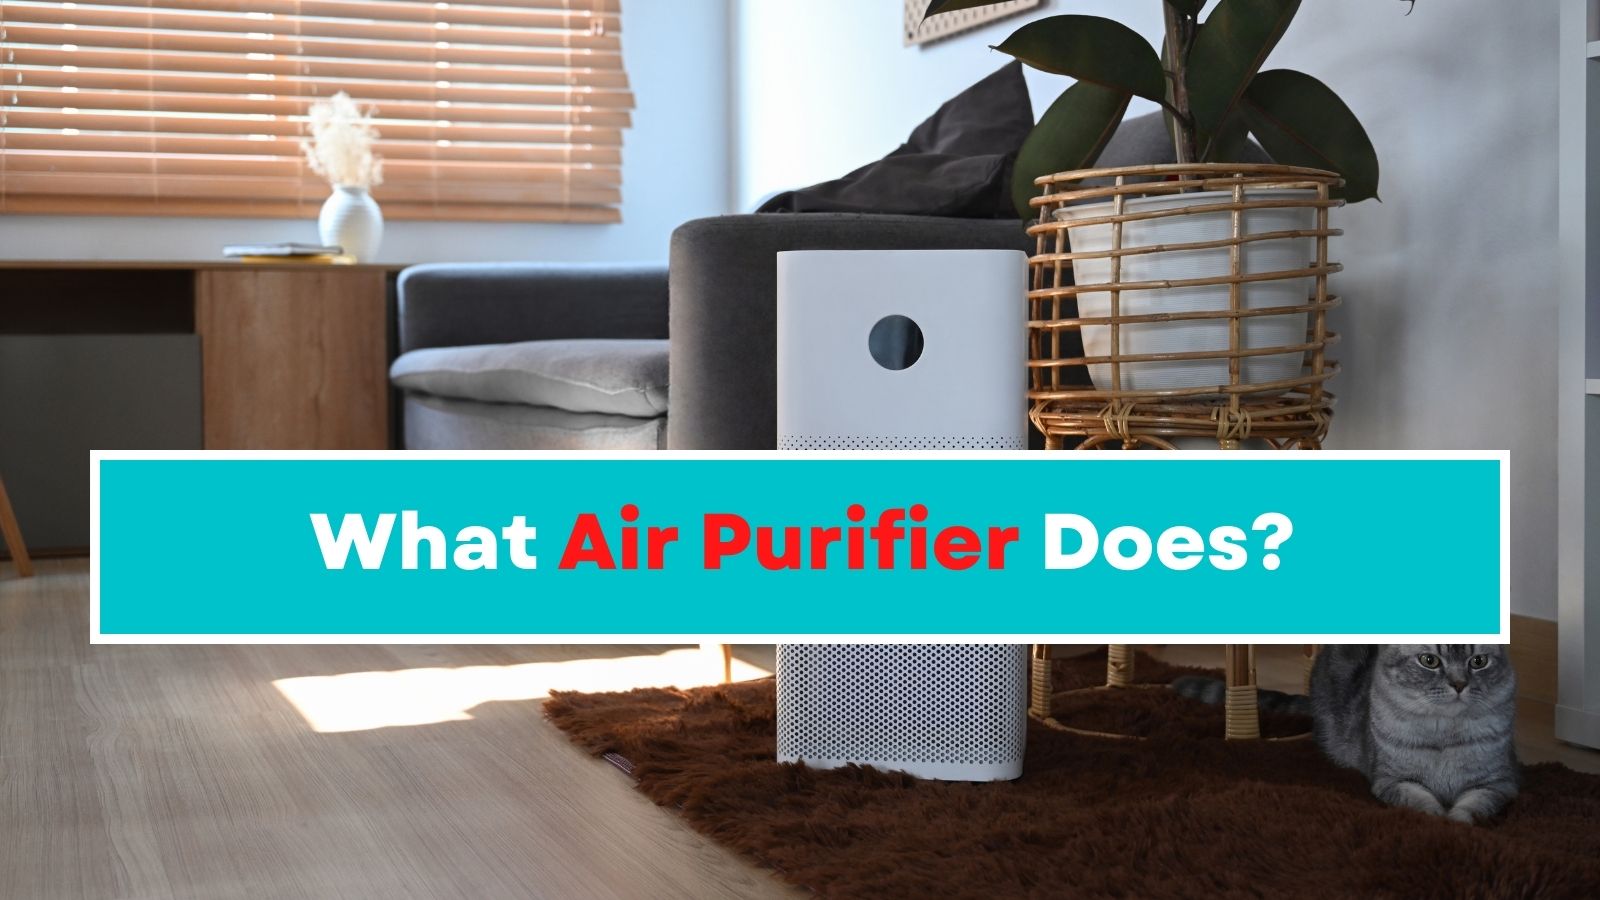 What Air Purifier Does?